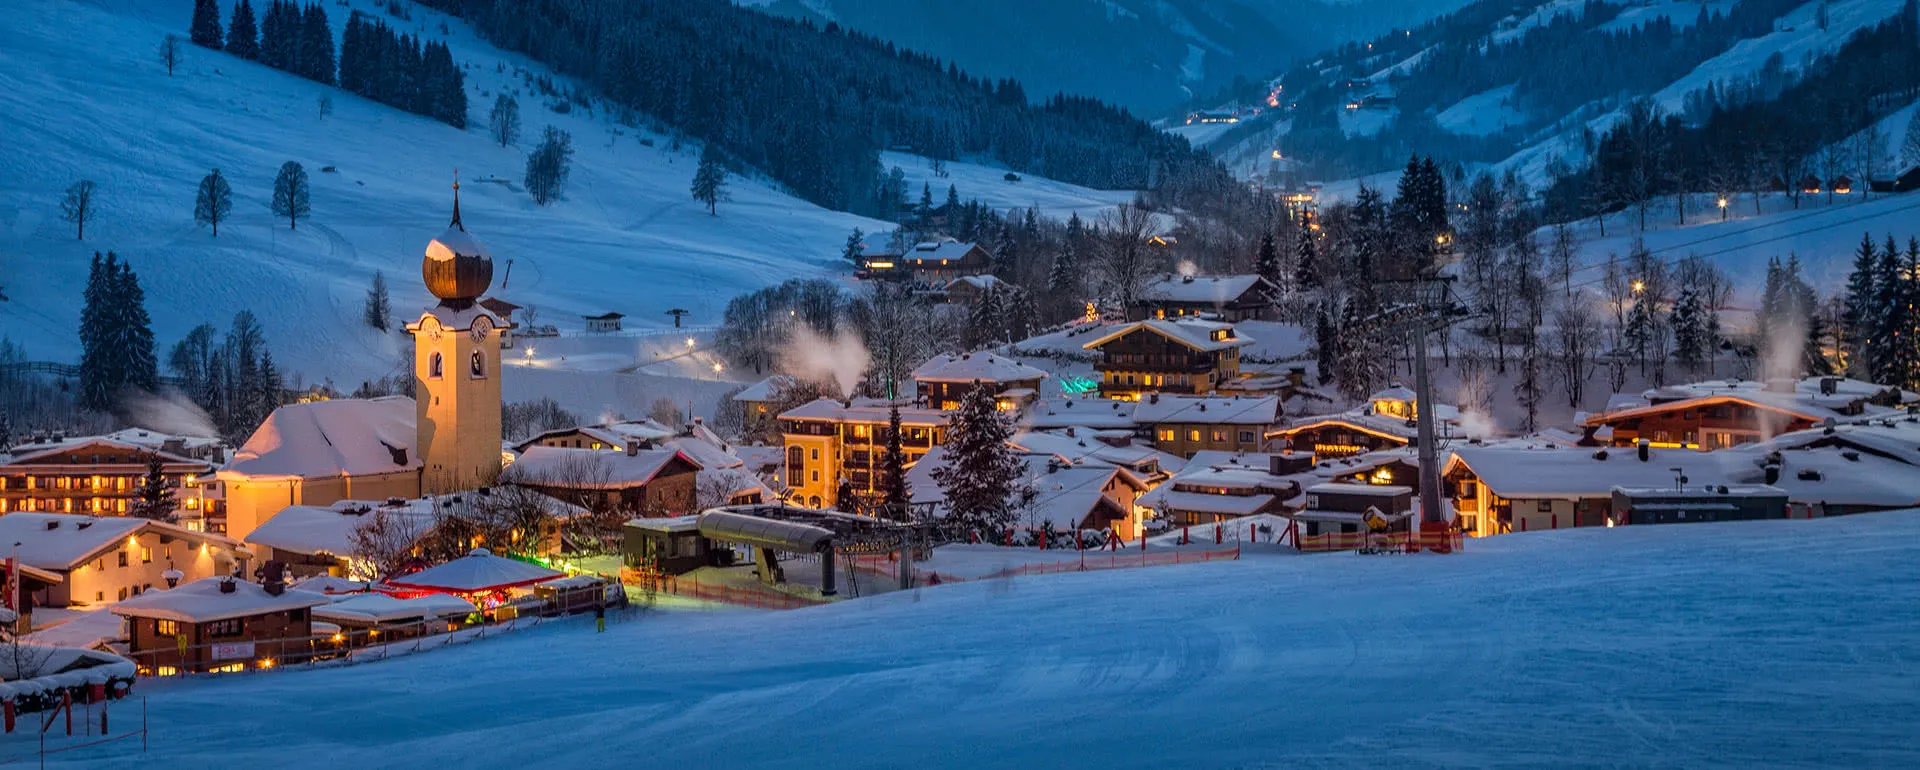 Saalbach - the destination with youth hostels